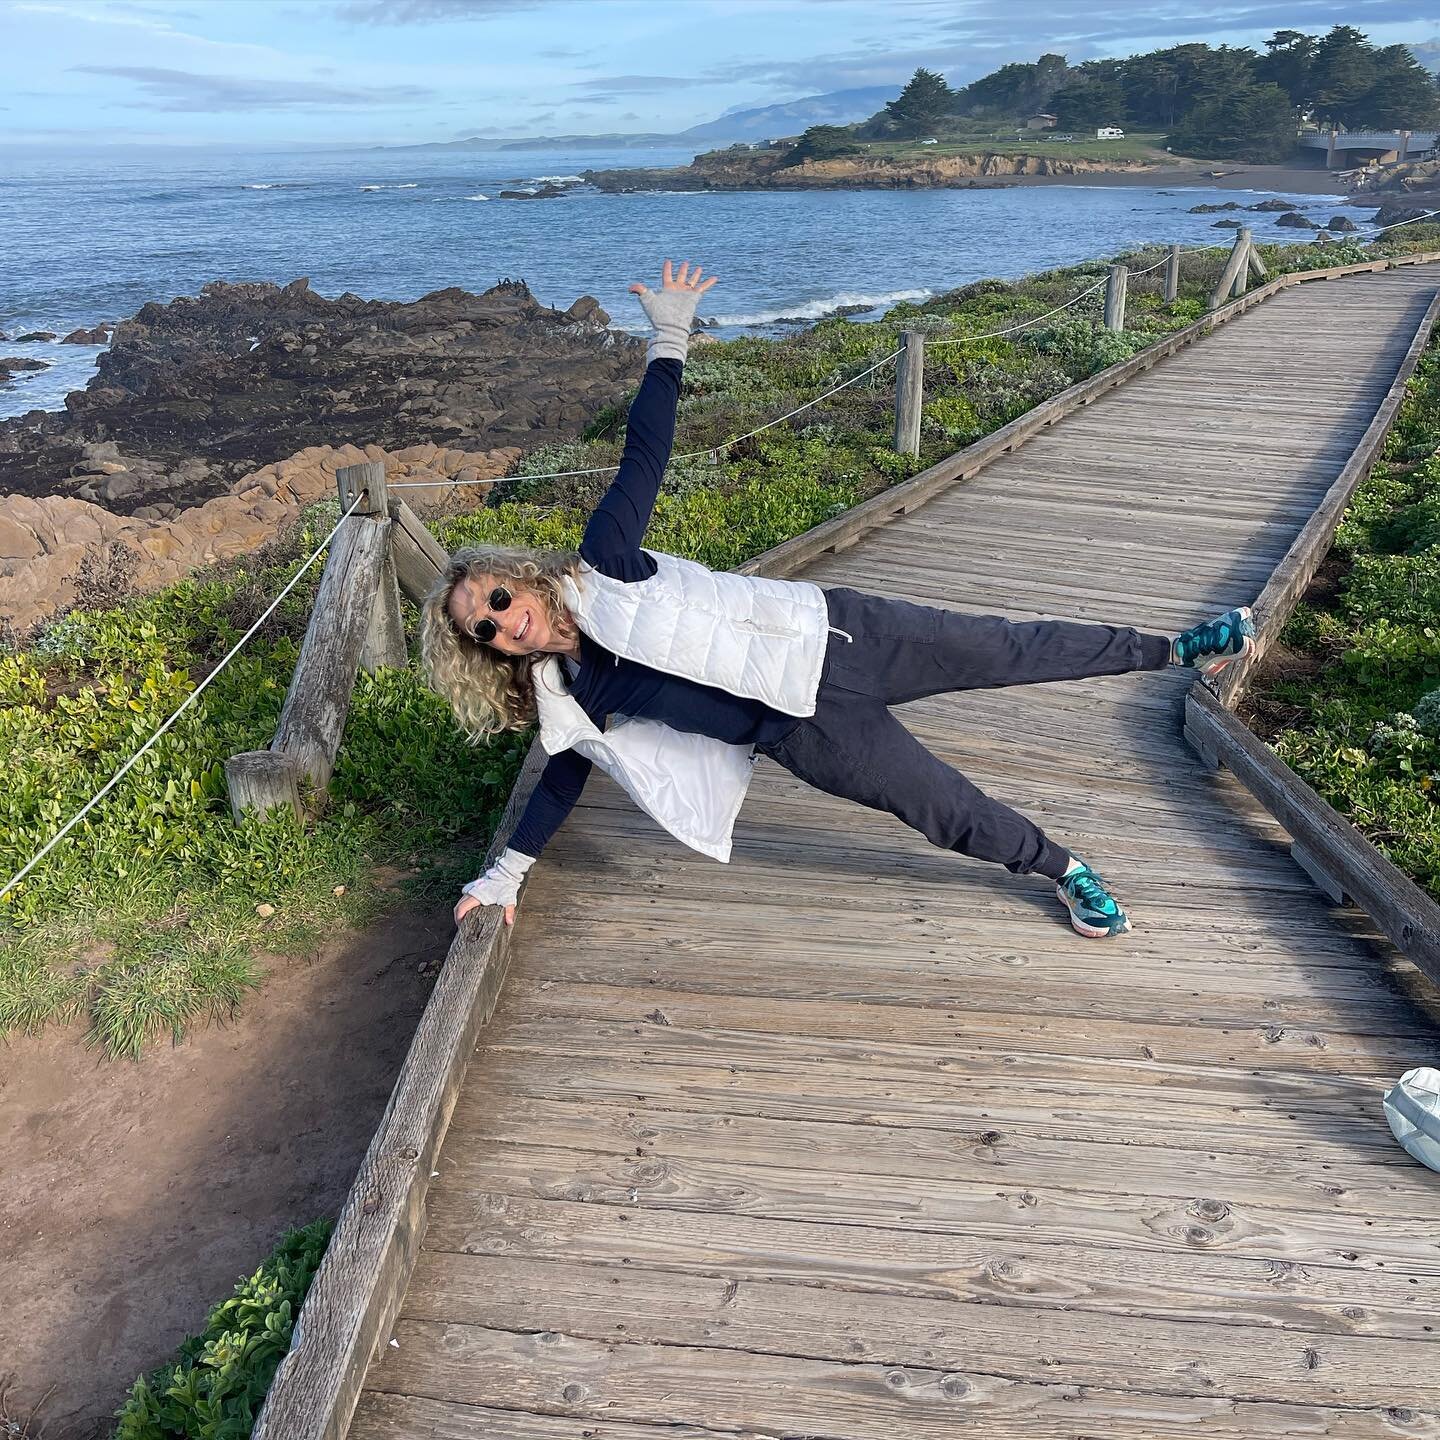 Cambria is the most magical place.  Celebrating 48 on 4/8 and feeling blessed!  This place IS a meditation. 
#birthday #aries #cambria #yoga #meditation #nature #love